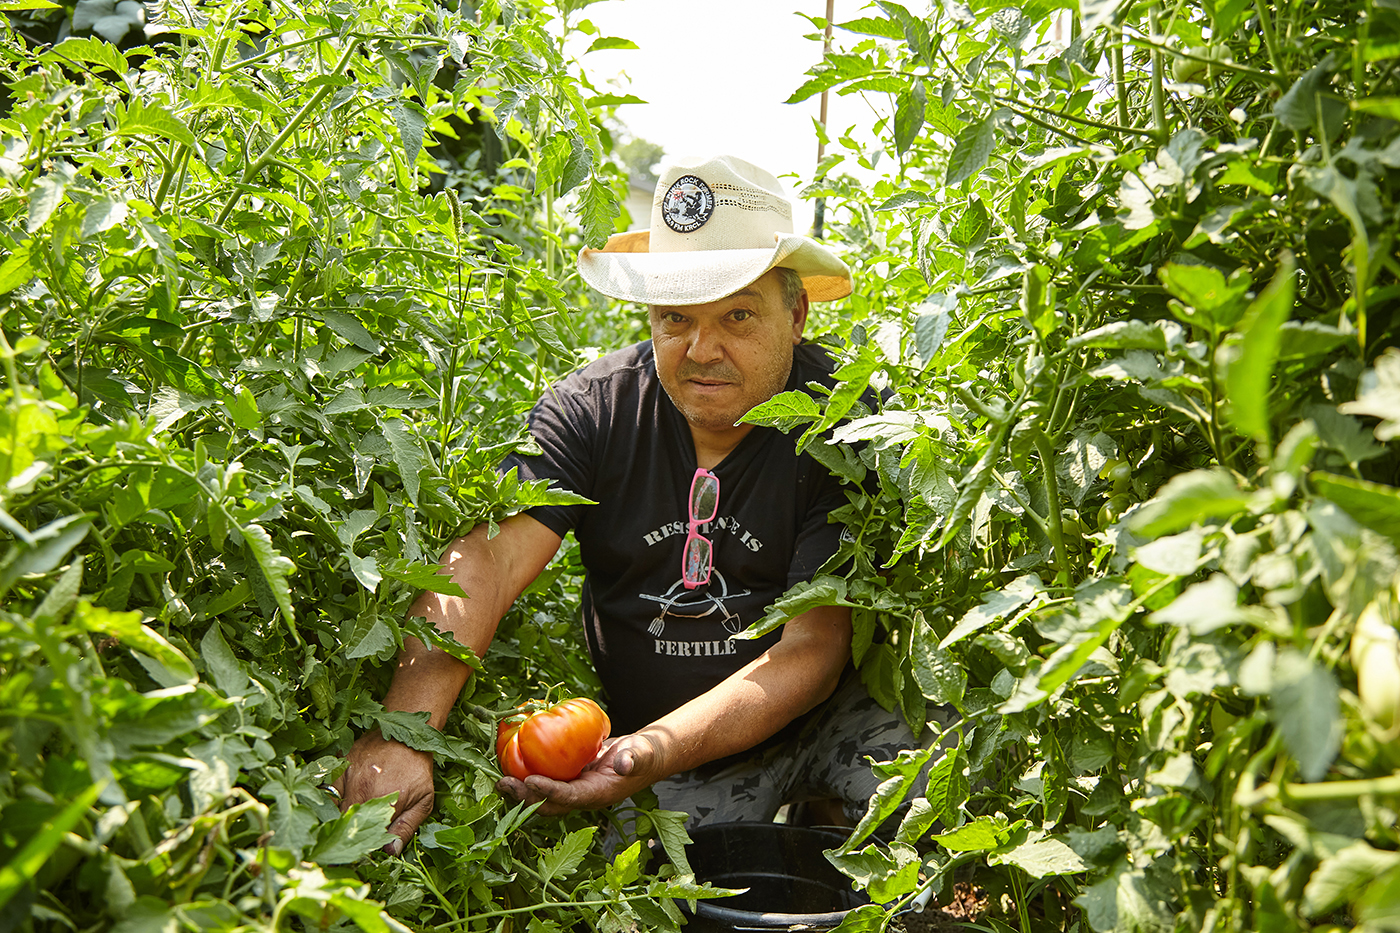 90.9FM KRCL’s Aldine Grossi, the Punk Rock Farmer, aims to galvanize our local community to grow “big F’n tomatoes”—or whatever you’d like to grow—in your own backyard.